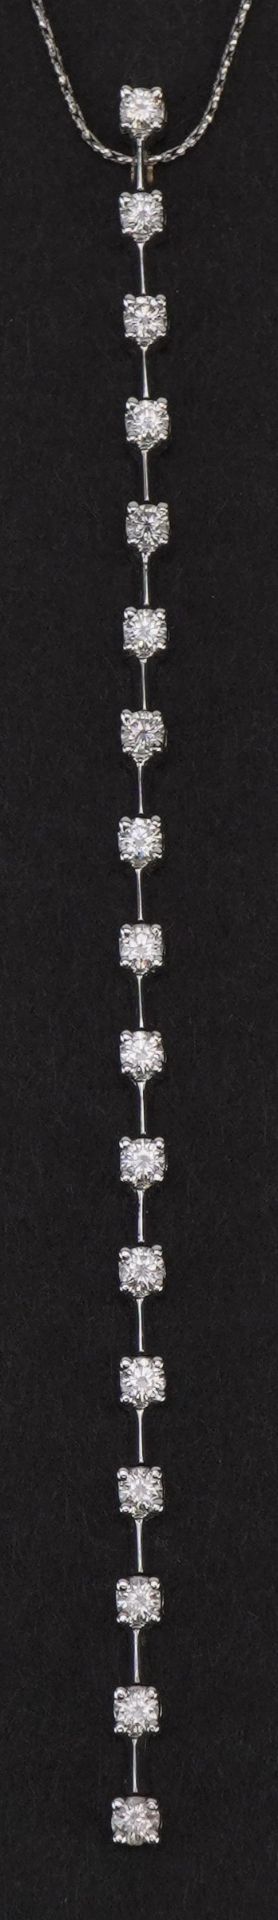 18ct white gold diamond line pendant set with seventeen diamonds on a 18ct white gold necklace, - Image 2 of 8